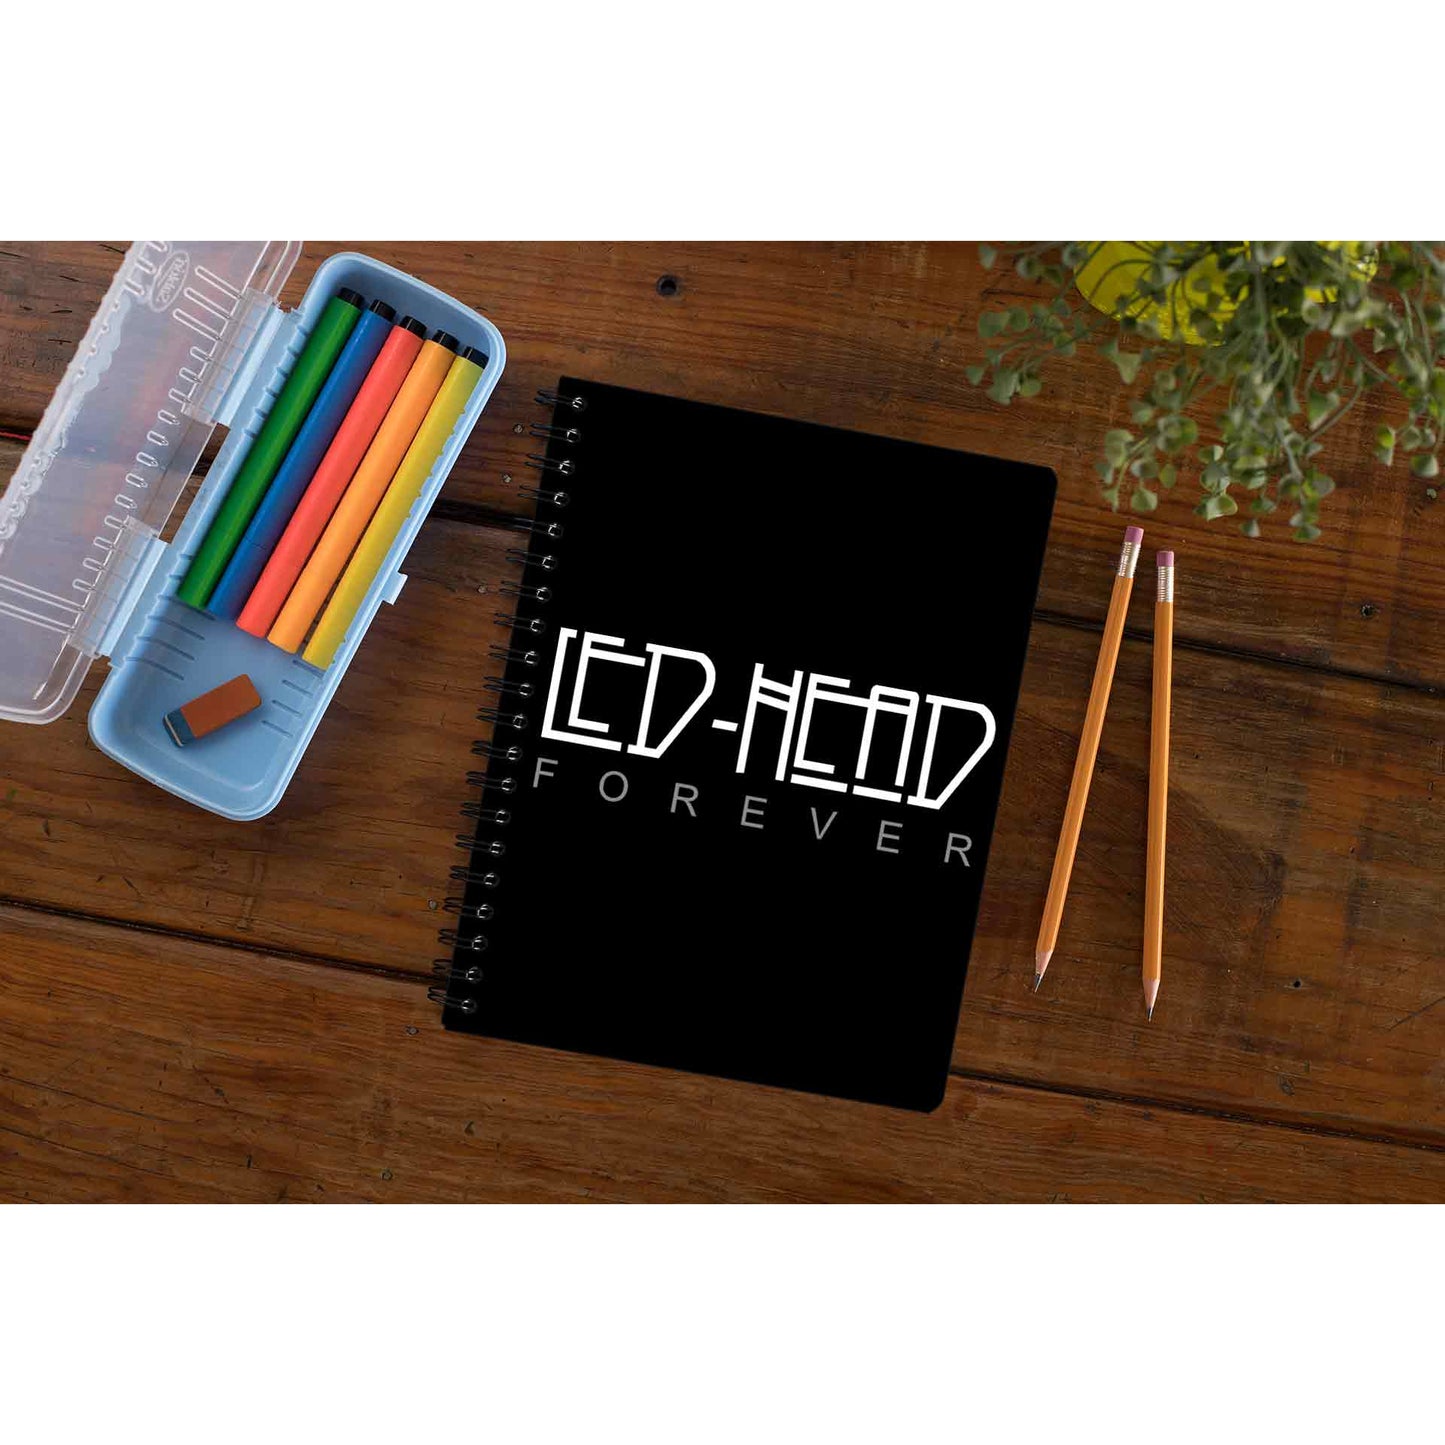 led zeppelin led head forever notebook notepad diary buy online united states of america usa the banyan tee tbt unruled 